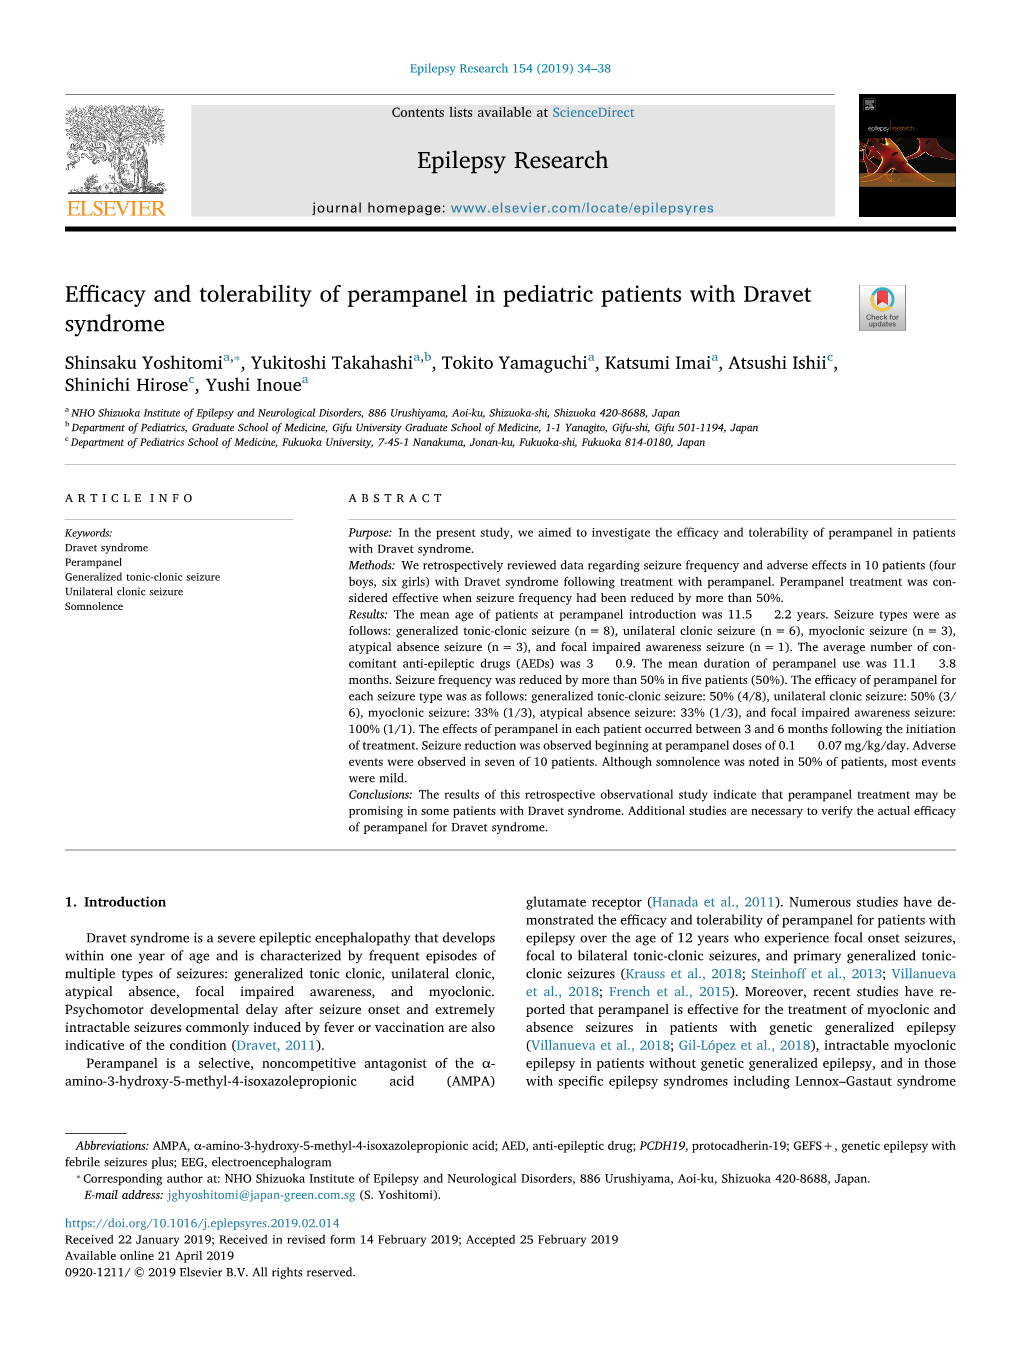 Efficacy and Tolerability of Perampanel in Pediatric Patients with Dravet